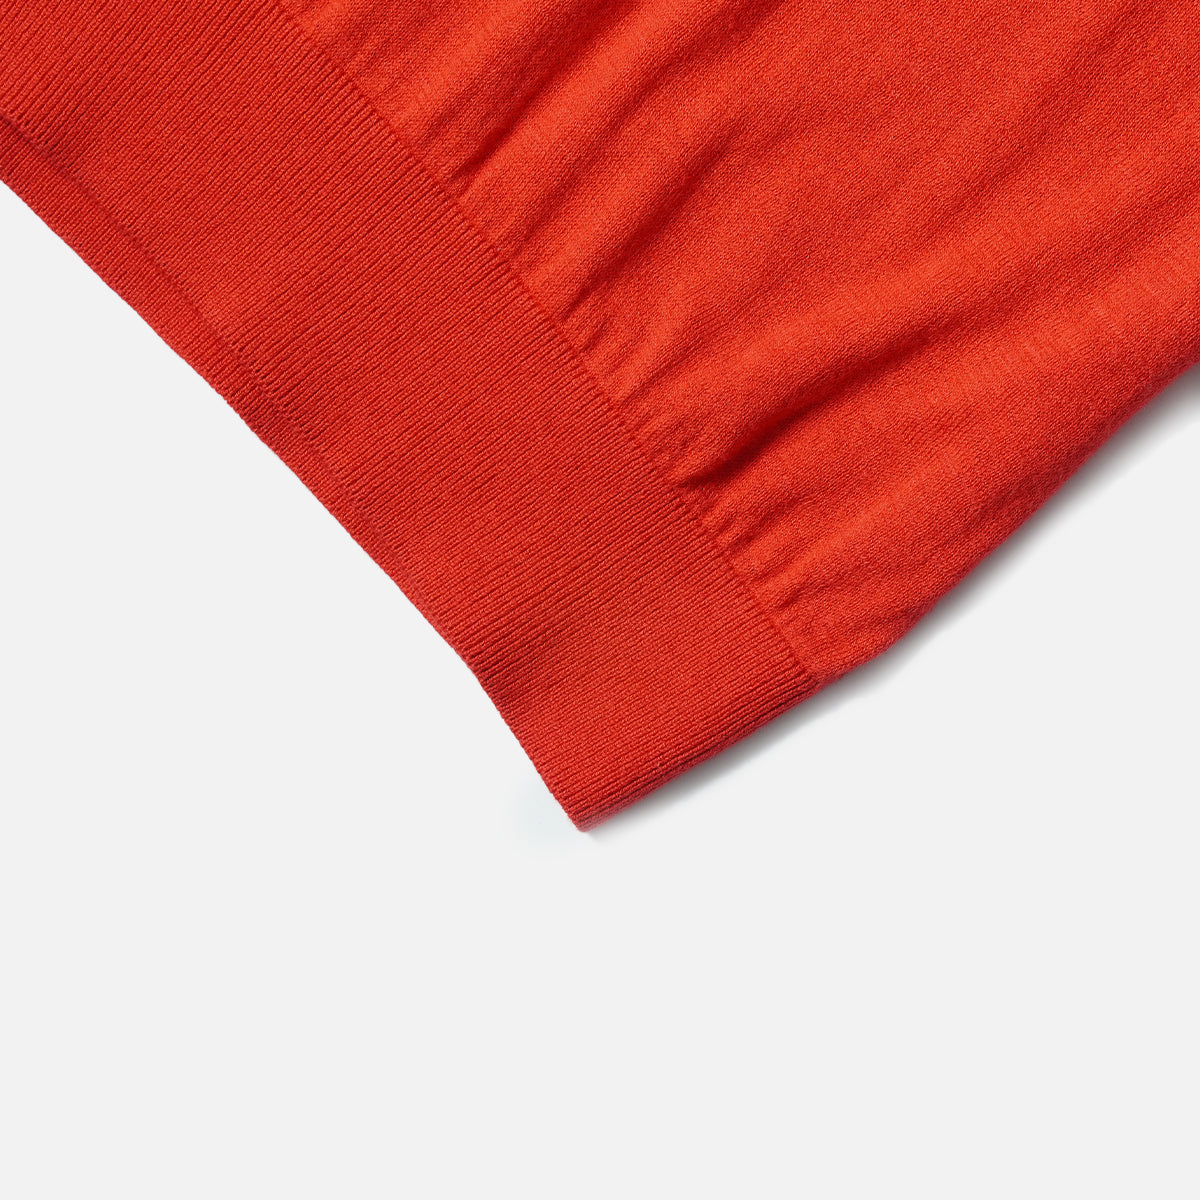 The Decorum Off Duty Red Knit T-Shirt